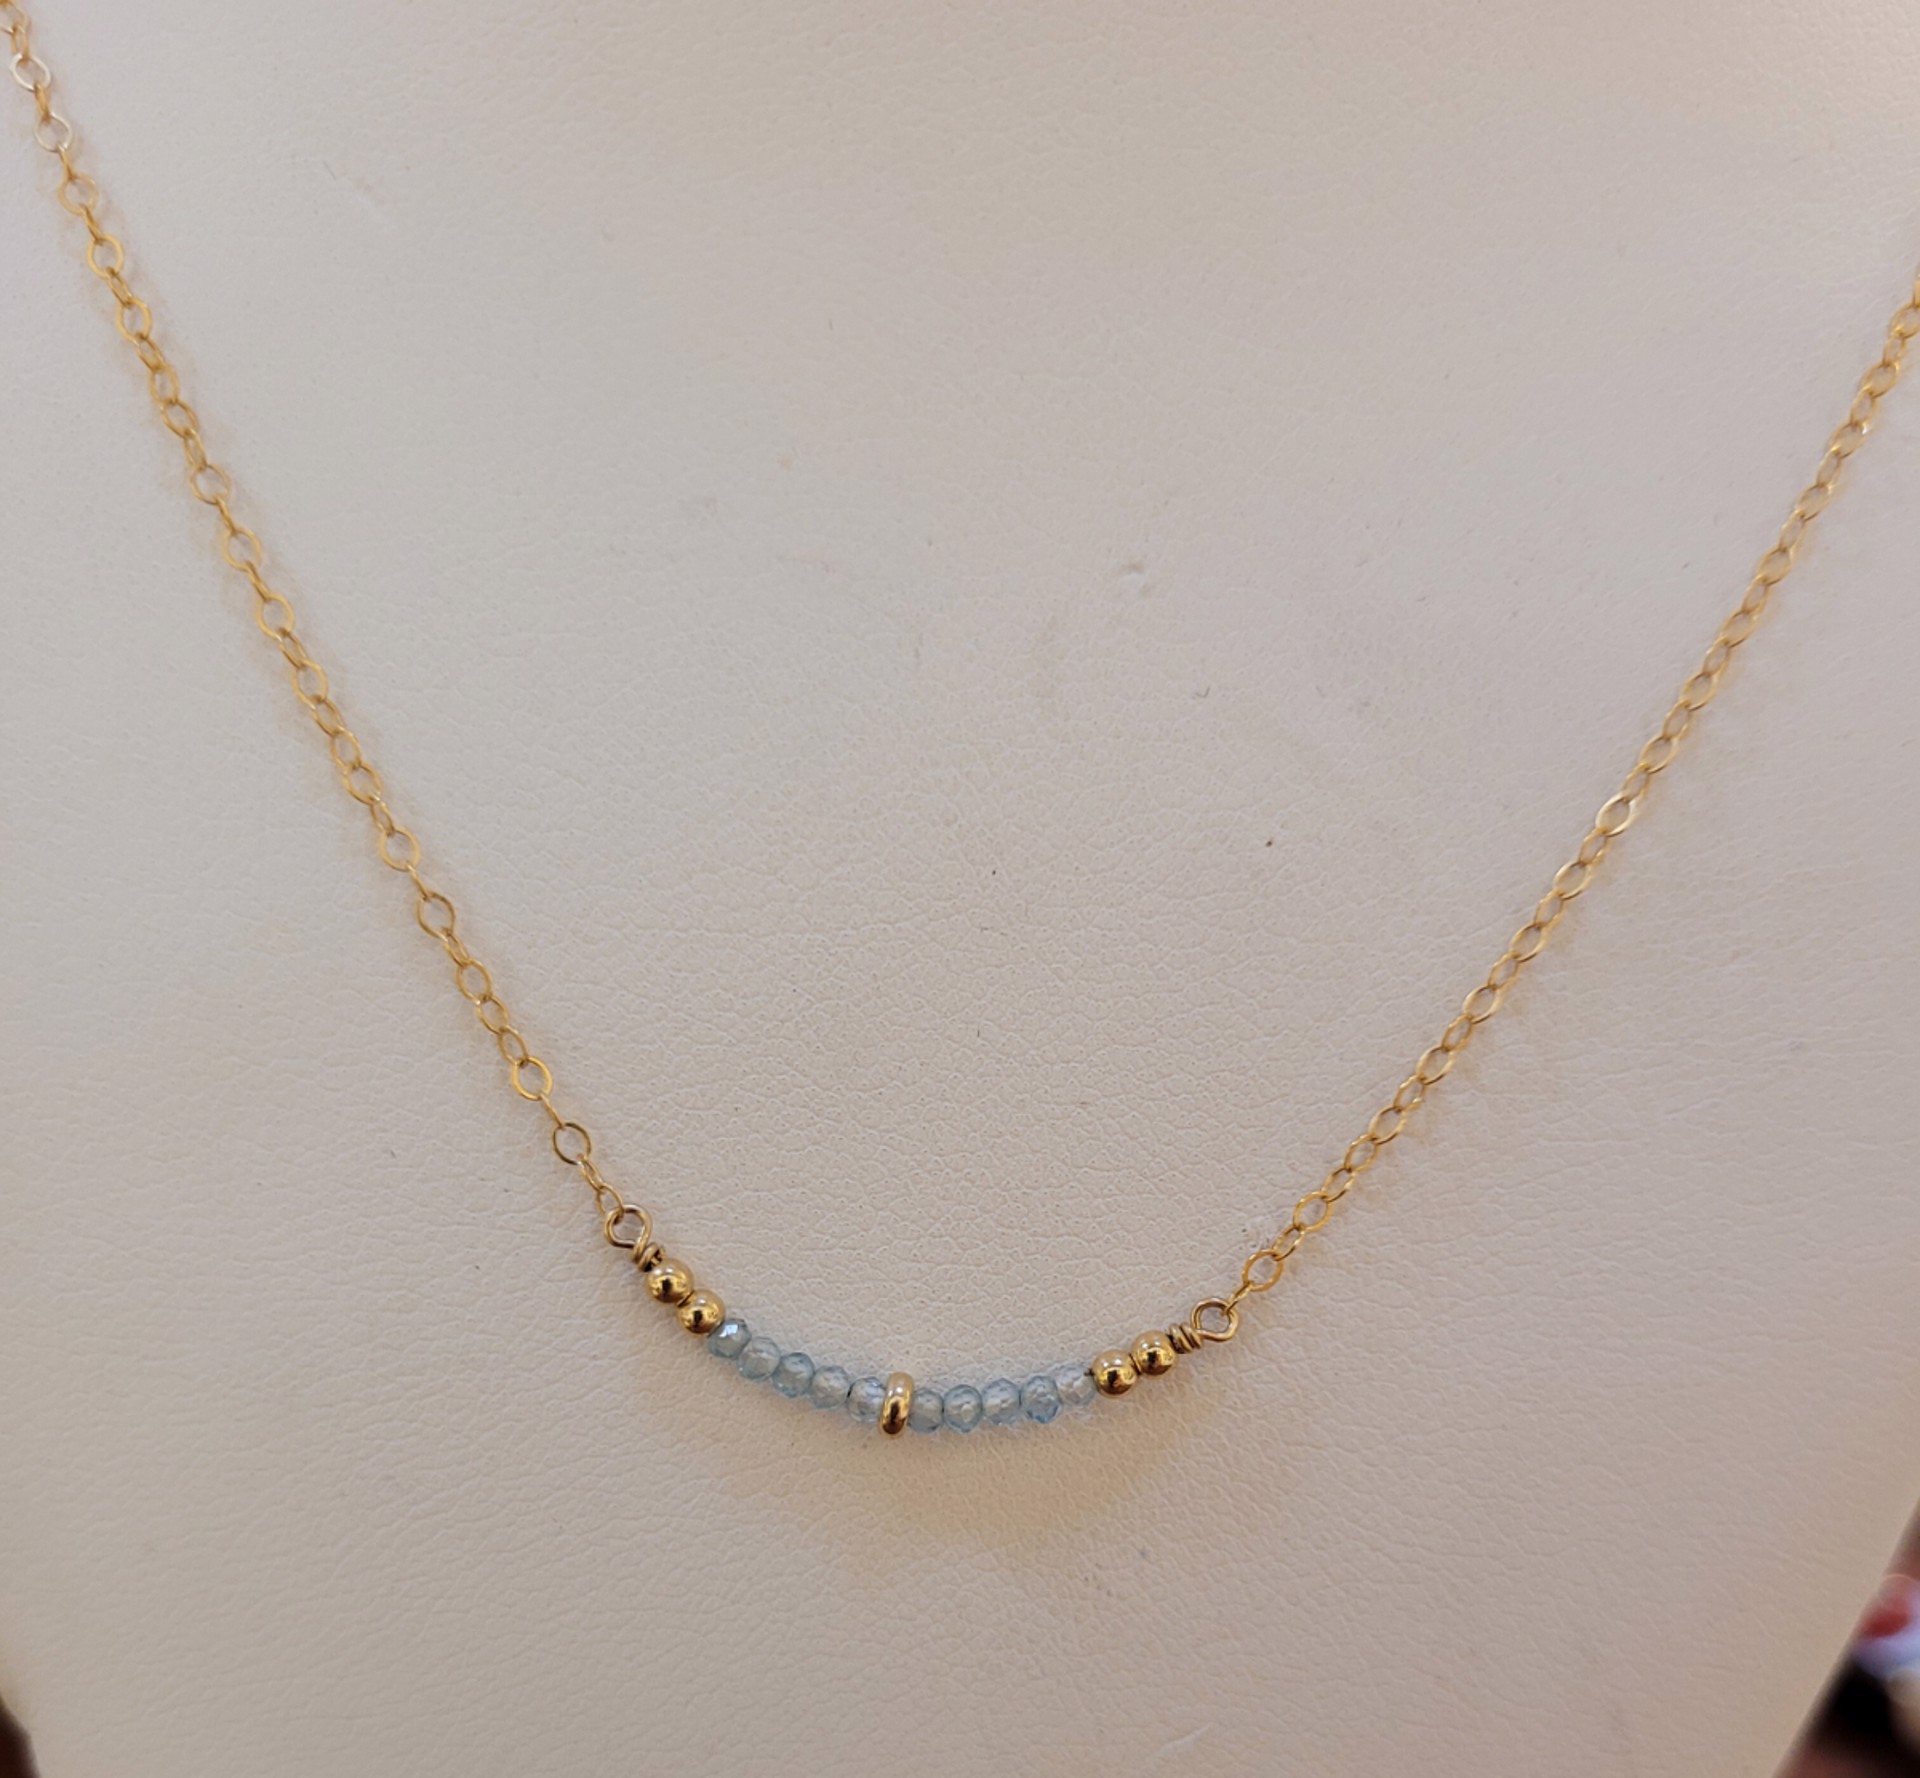 Necklace - Blue Zircon Crescent 14K Gold Filled by Julia Balestracci